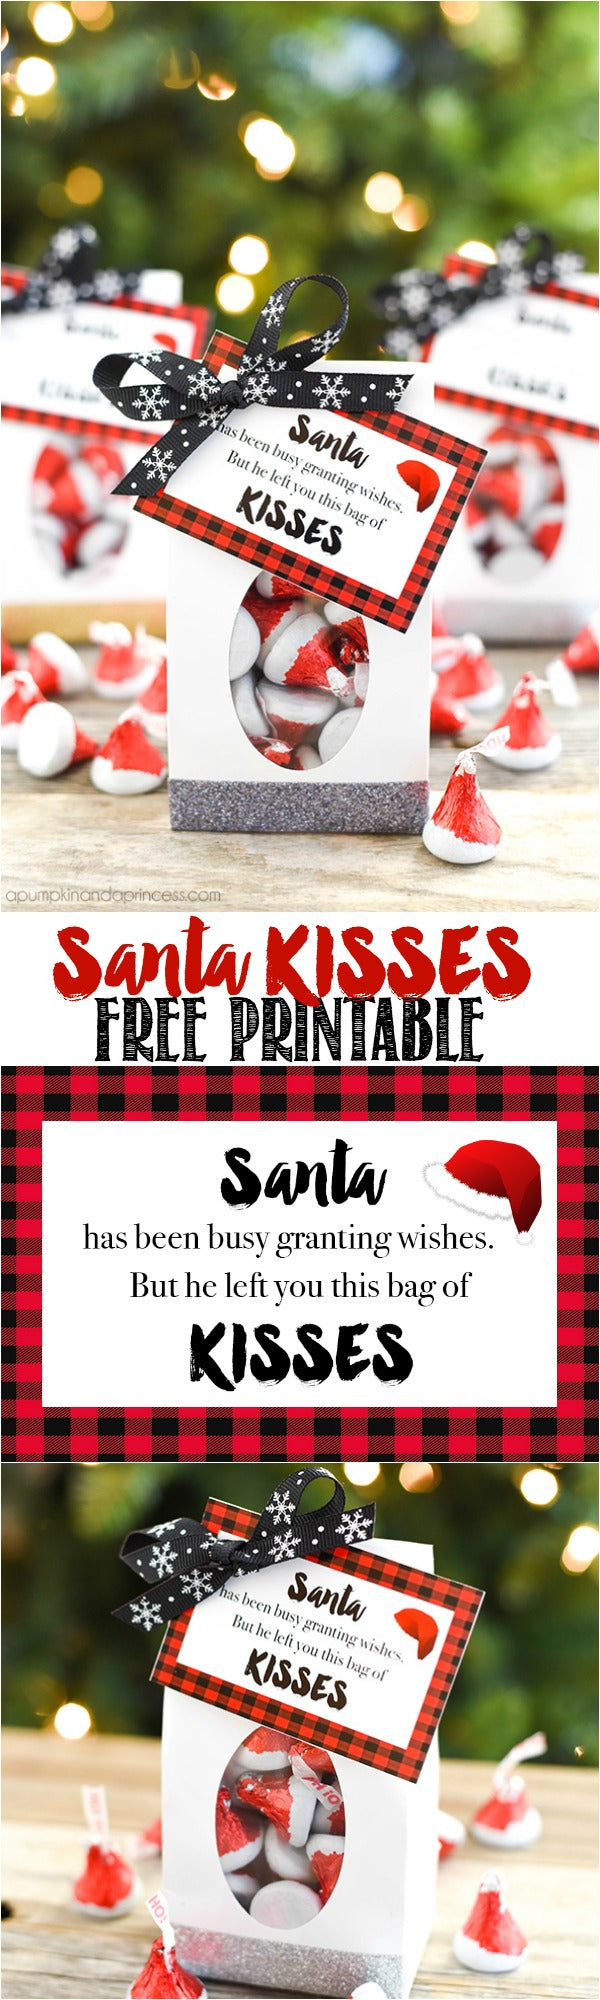 Christmas stocking stuffer ideas with Hershey's kisses